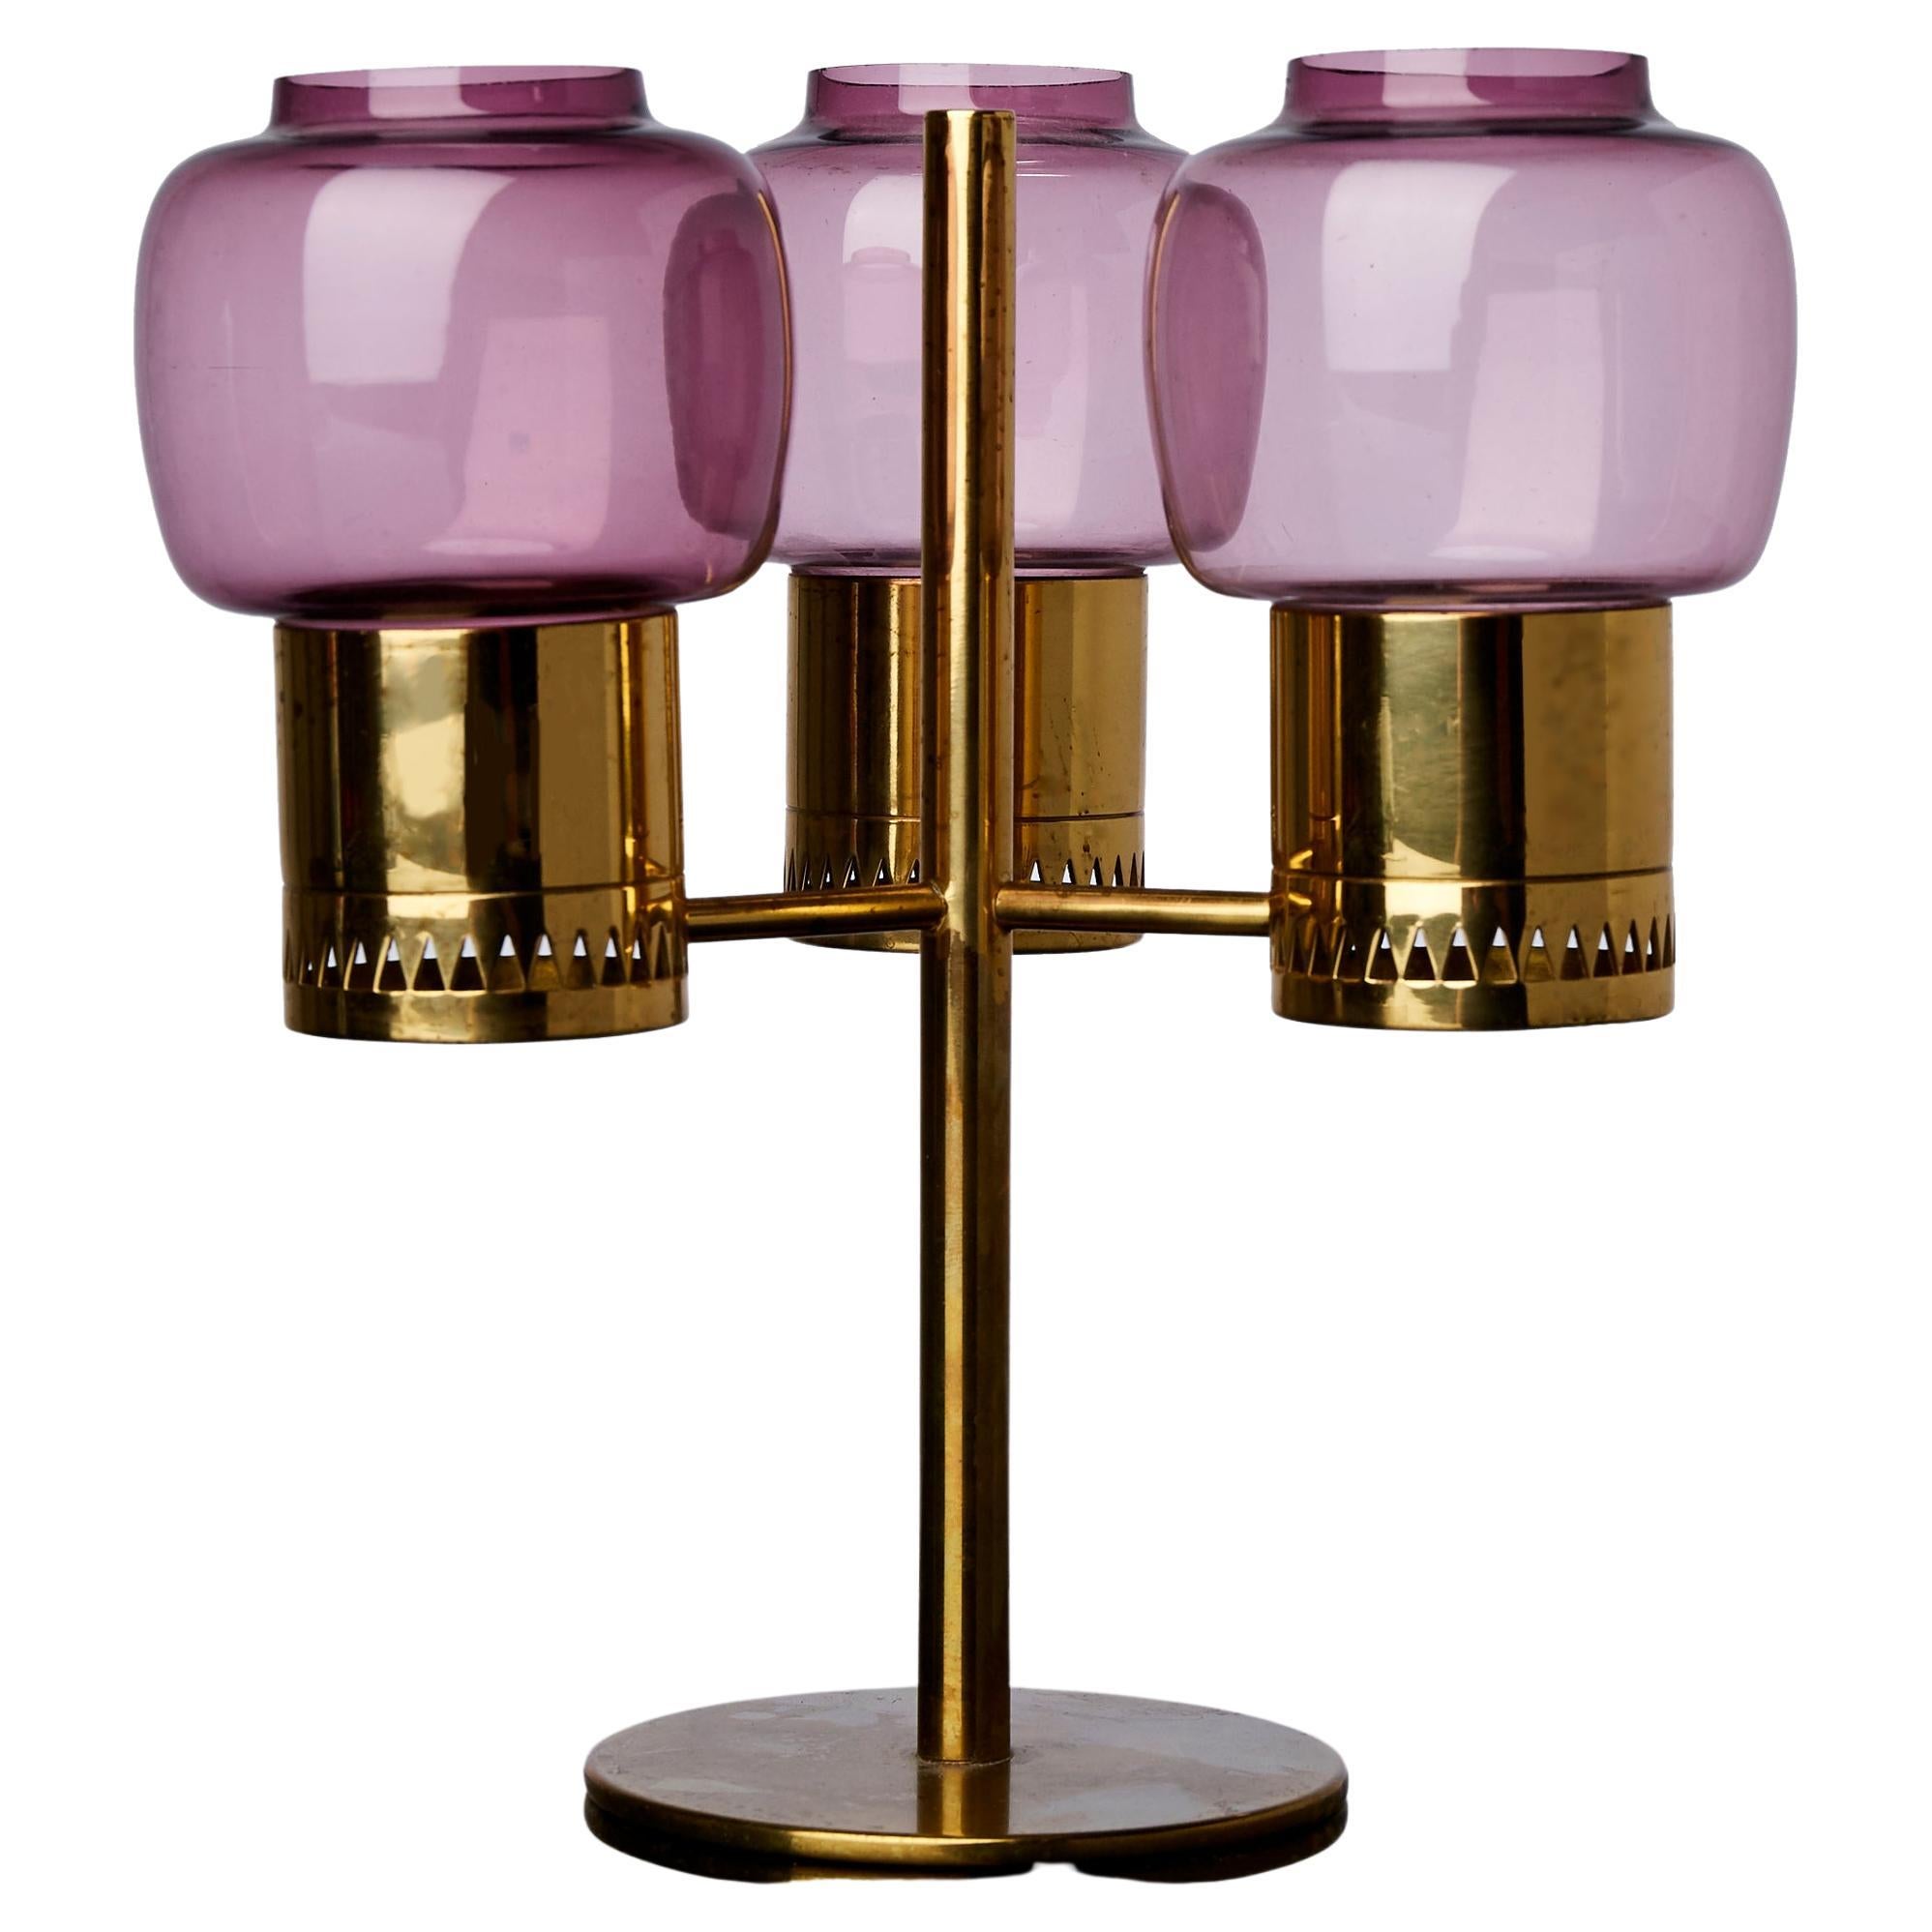 Scandinavian Modern Hans-Agne Jakobsson three armed candle holder in brass with a smashing lilac/pink color designed for Hans-Agne Jakobsson Markaryd, AB Sweden, 1950s. Polished brass and hand blown with fabulous and rare lilac pink glass shades,